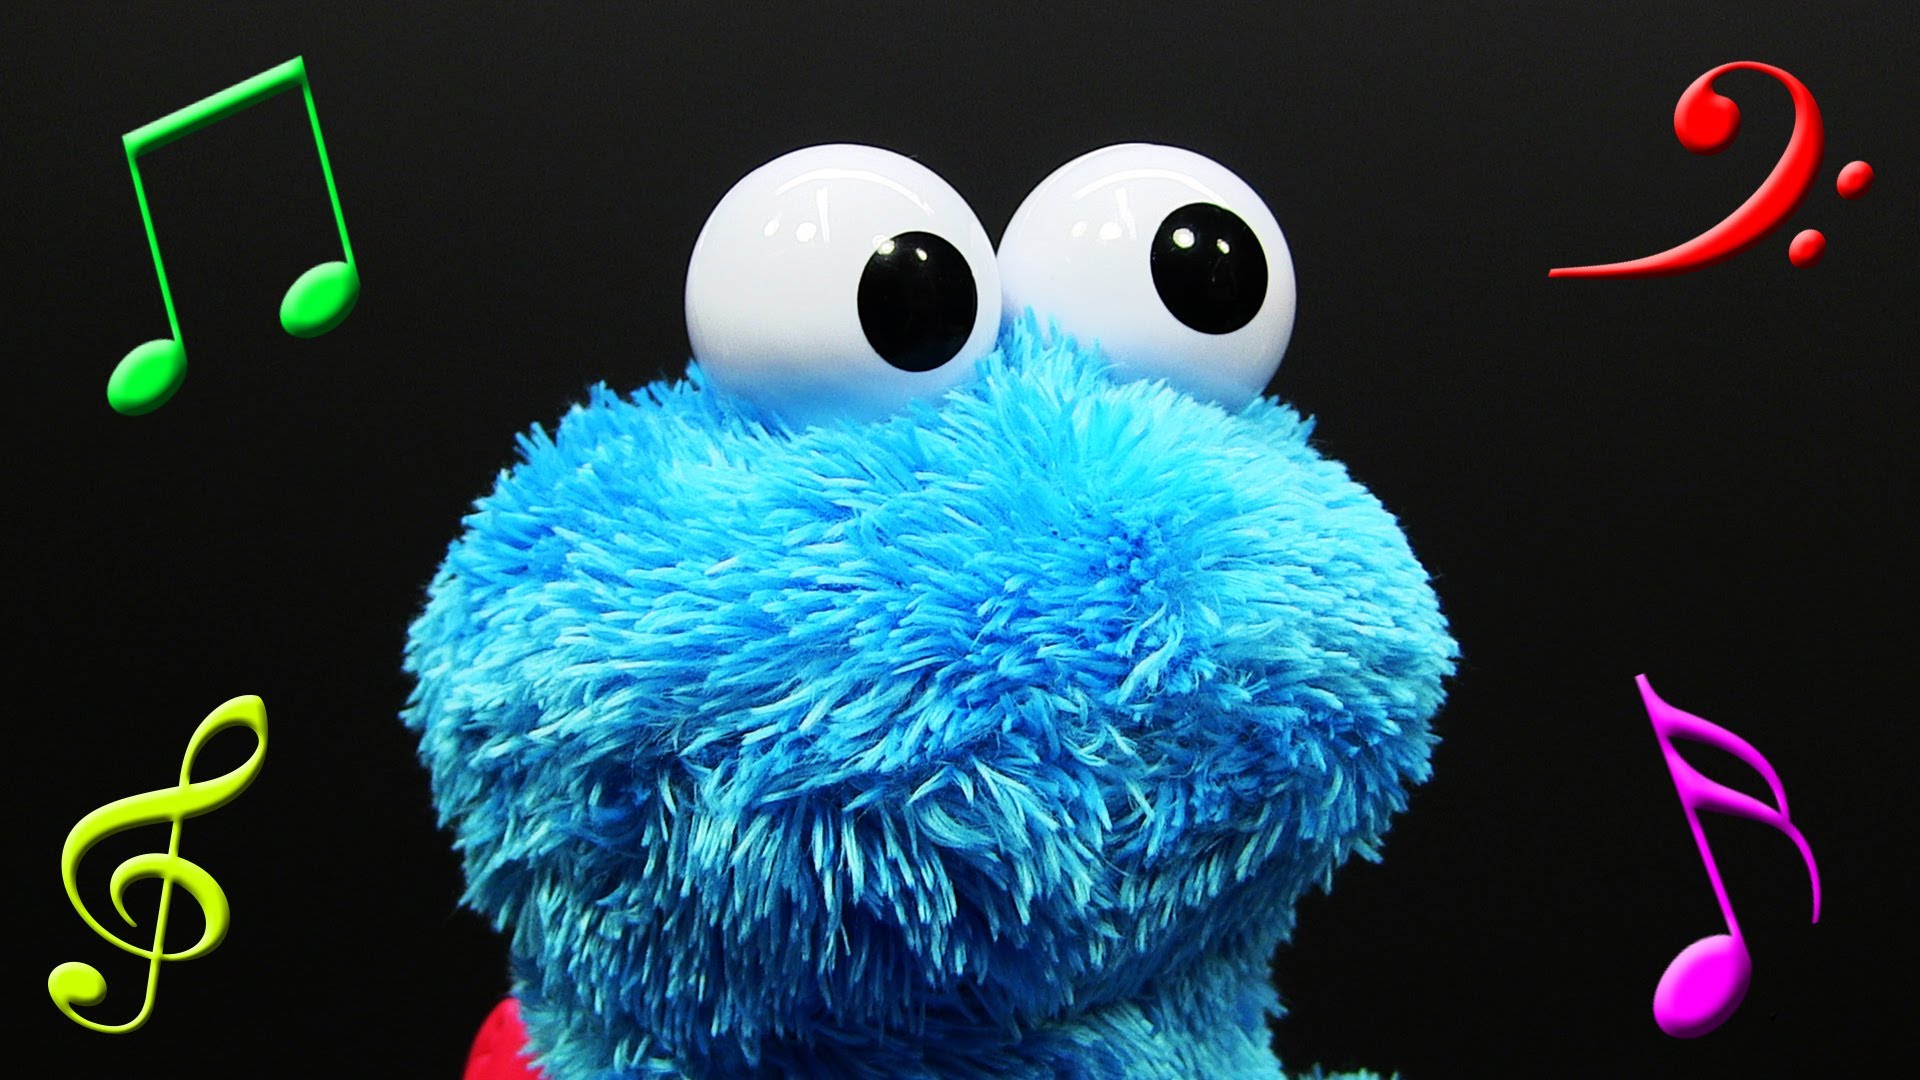 High Resolution Cookie Monster Music Wallpaper Hd 1080p Full Size ...